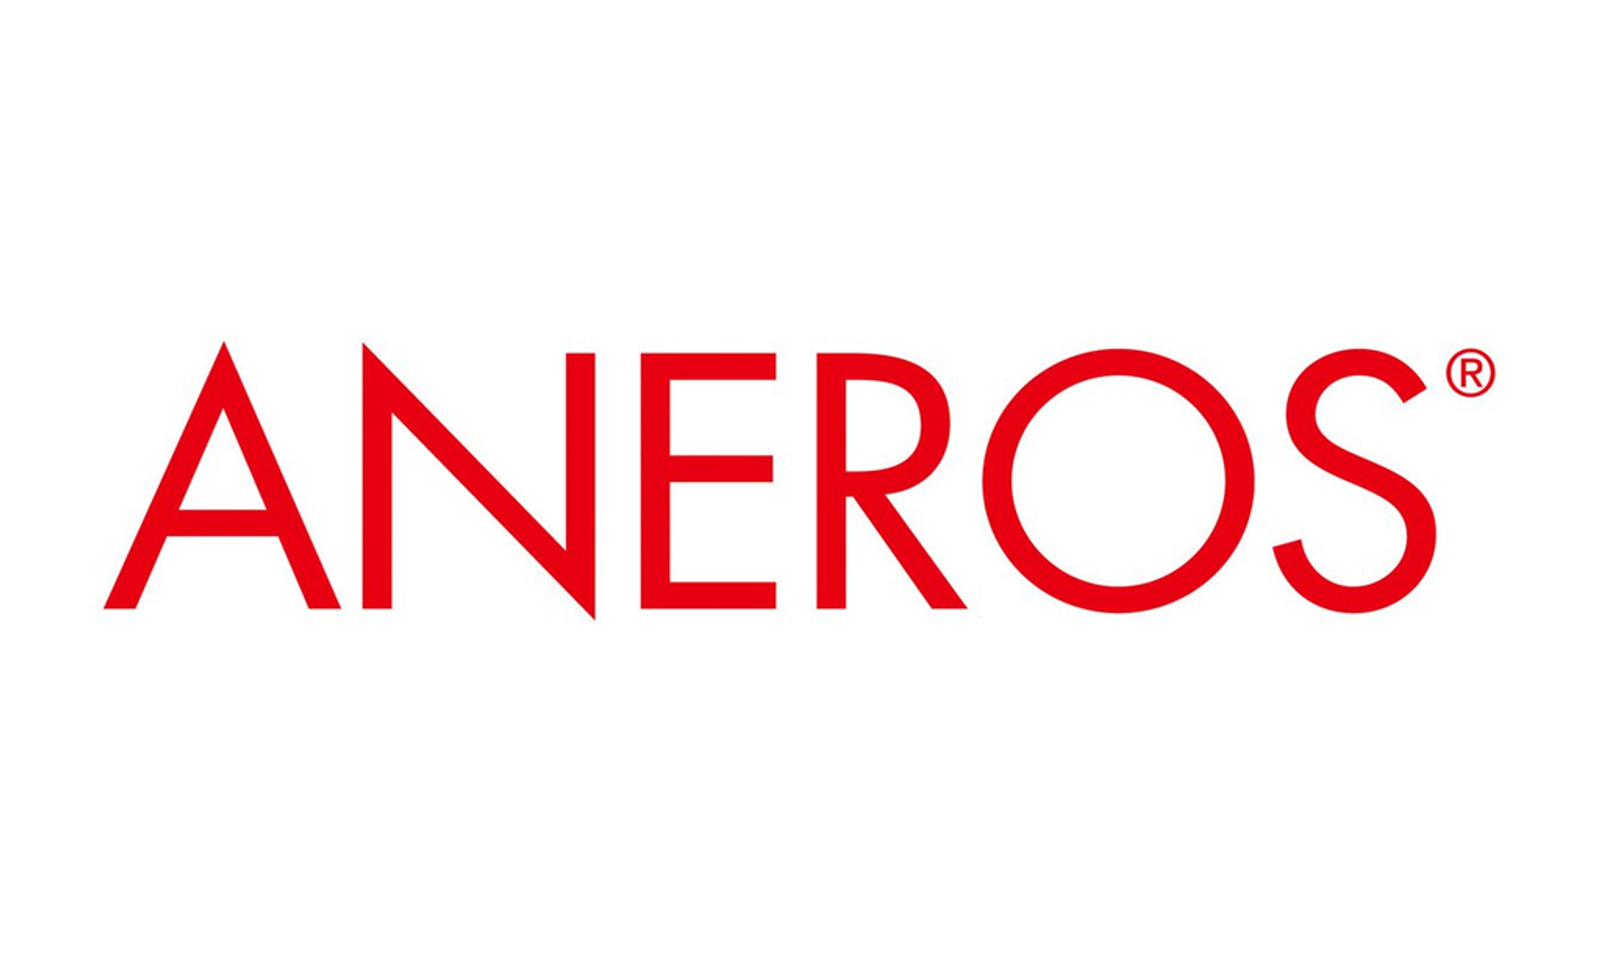 Aneros Announces Winners of the Aneros Goes Blue Design Contest